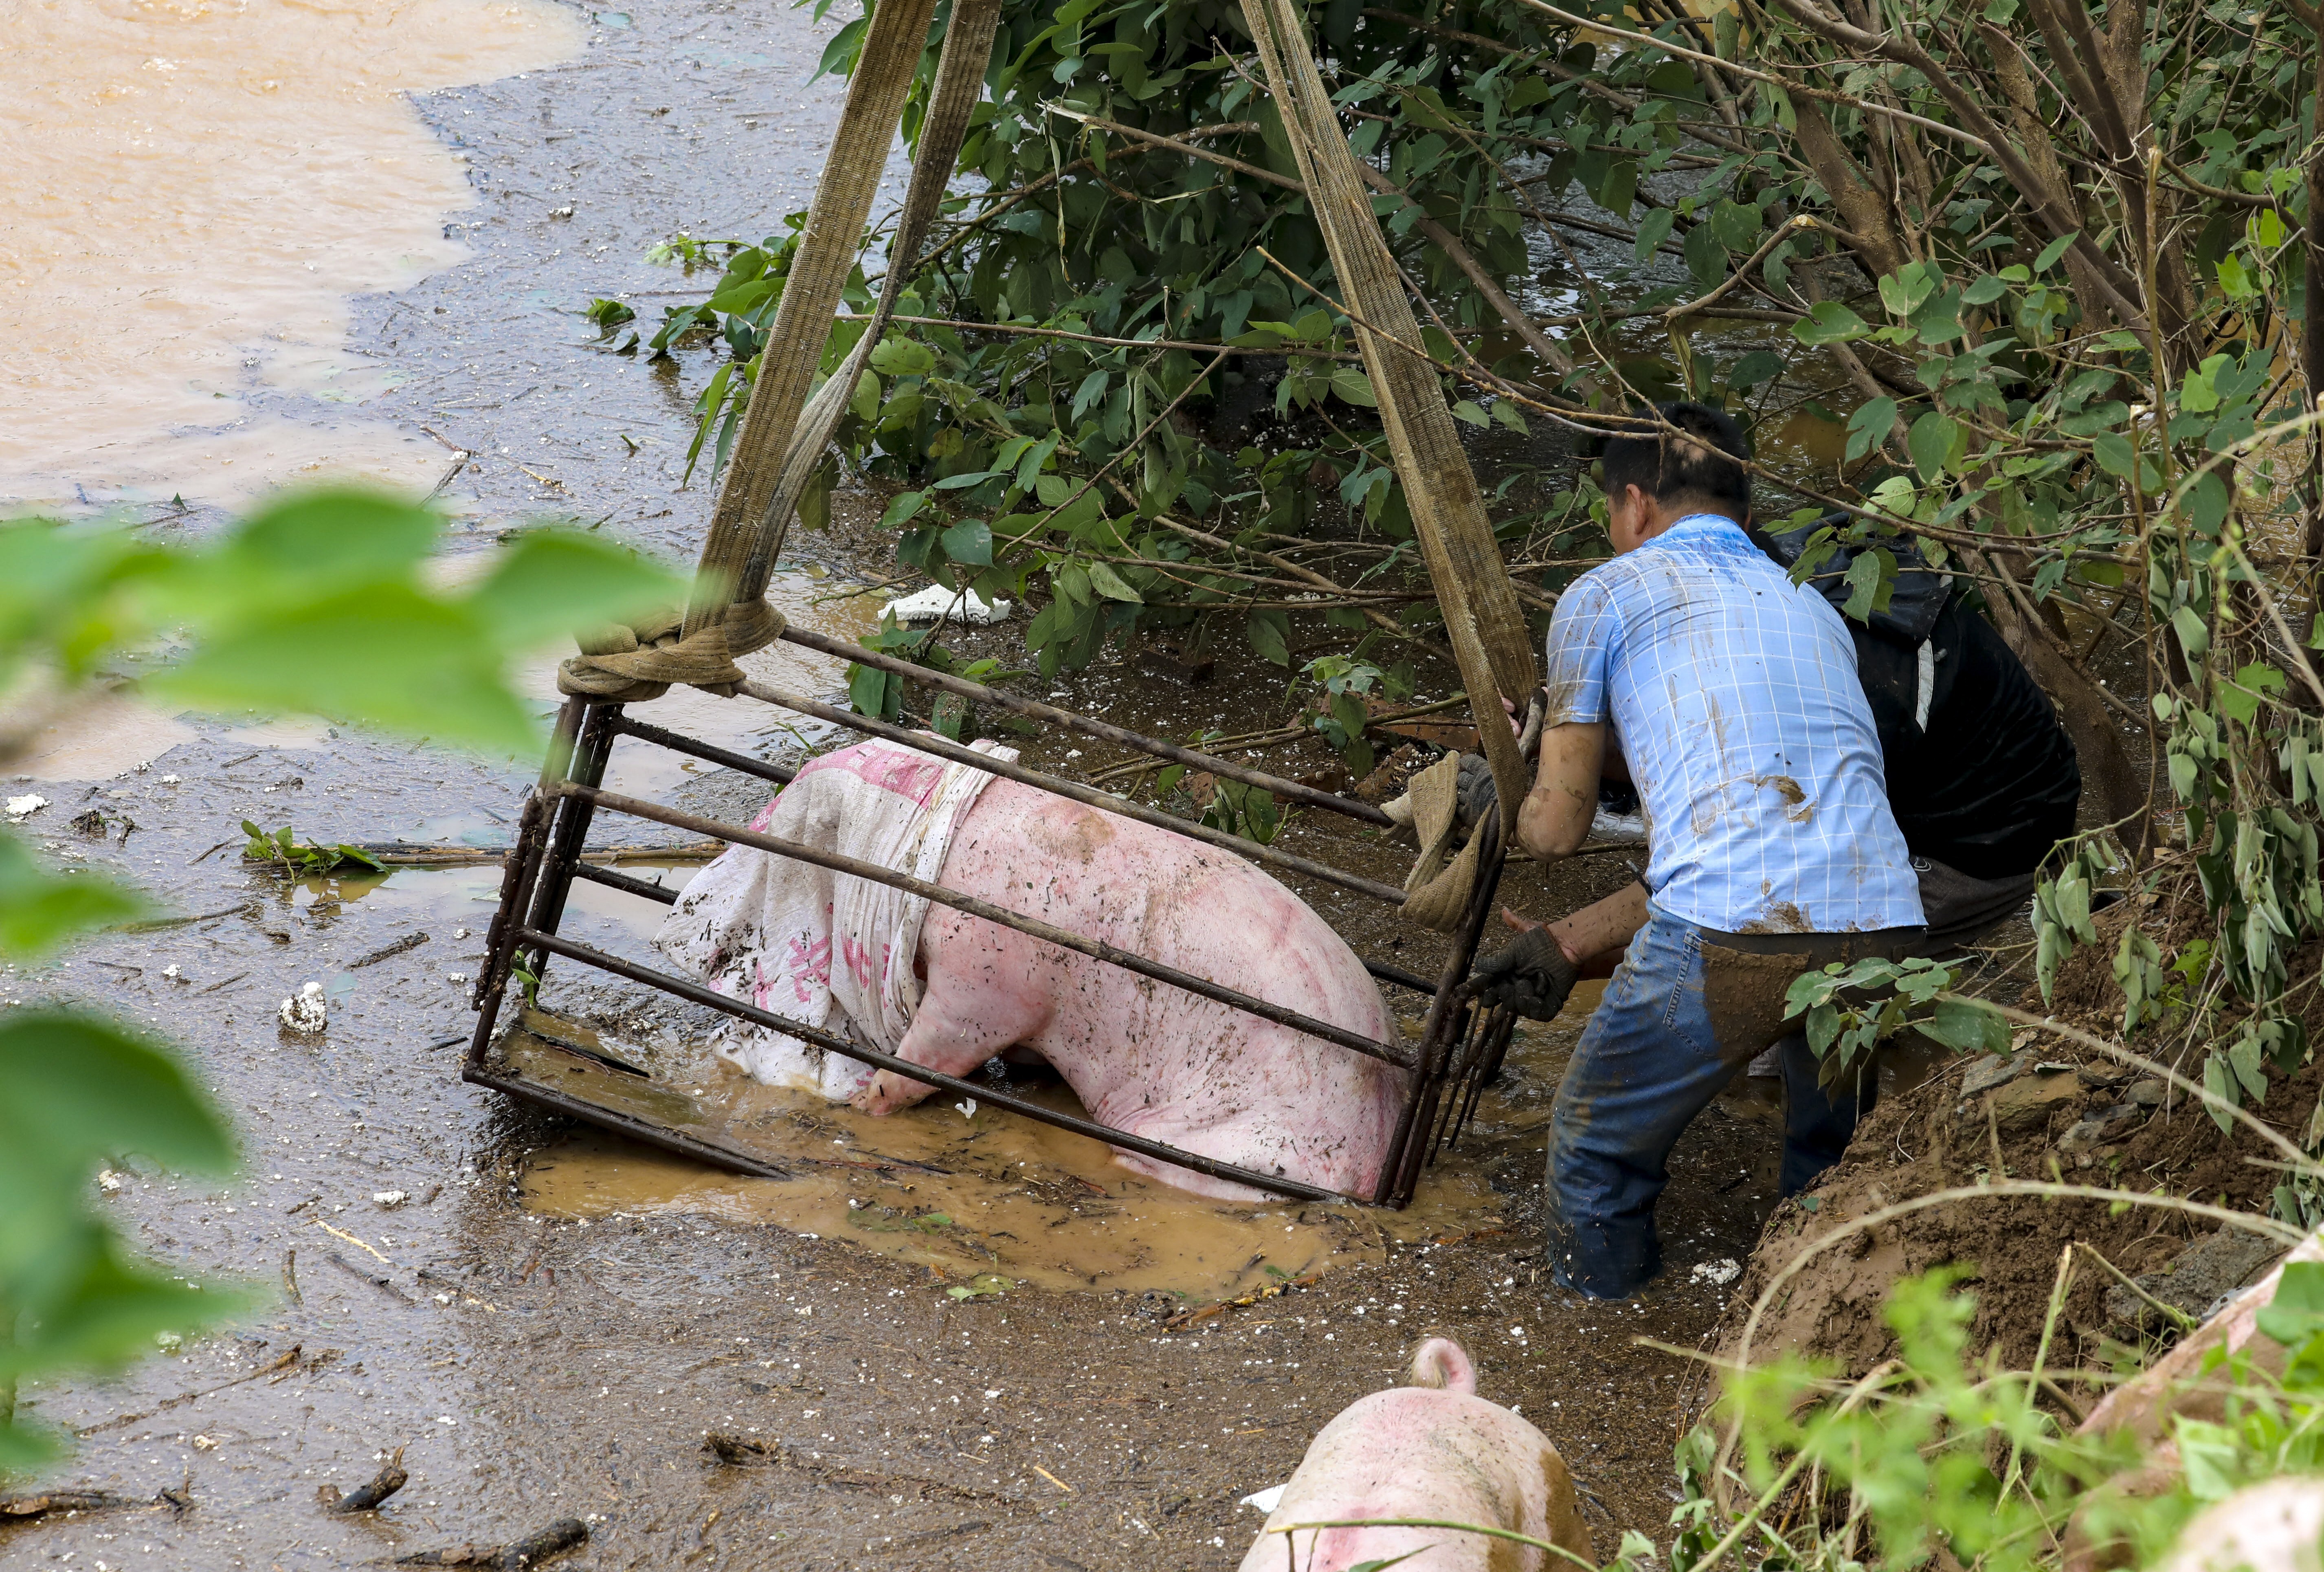 The floods have led to a slight rise in the price of poultry, eggs, beef and mutton, according to the agriculture and rural affairs ministry, while the price of pork – the staple meat in China – has remained stable in recent weeks. Photo: Simon Song